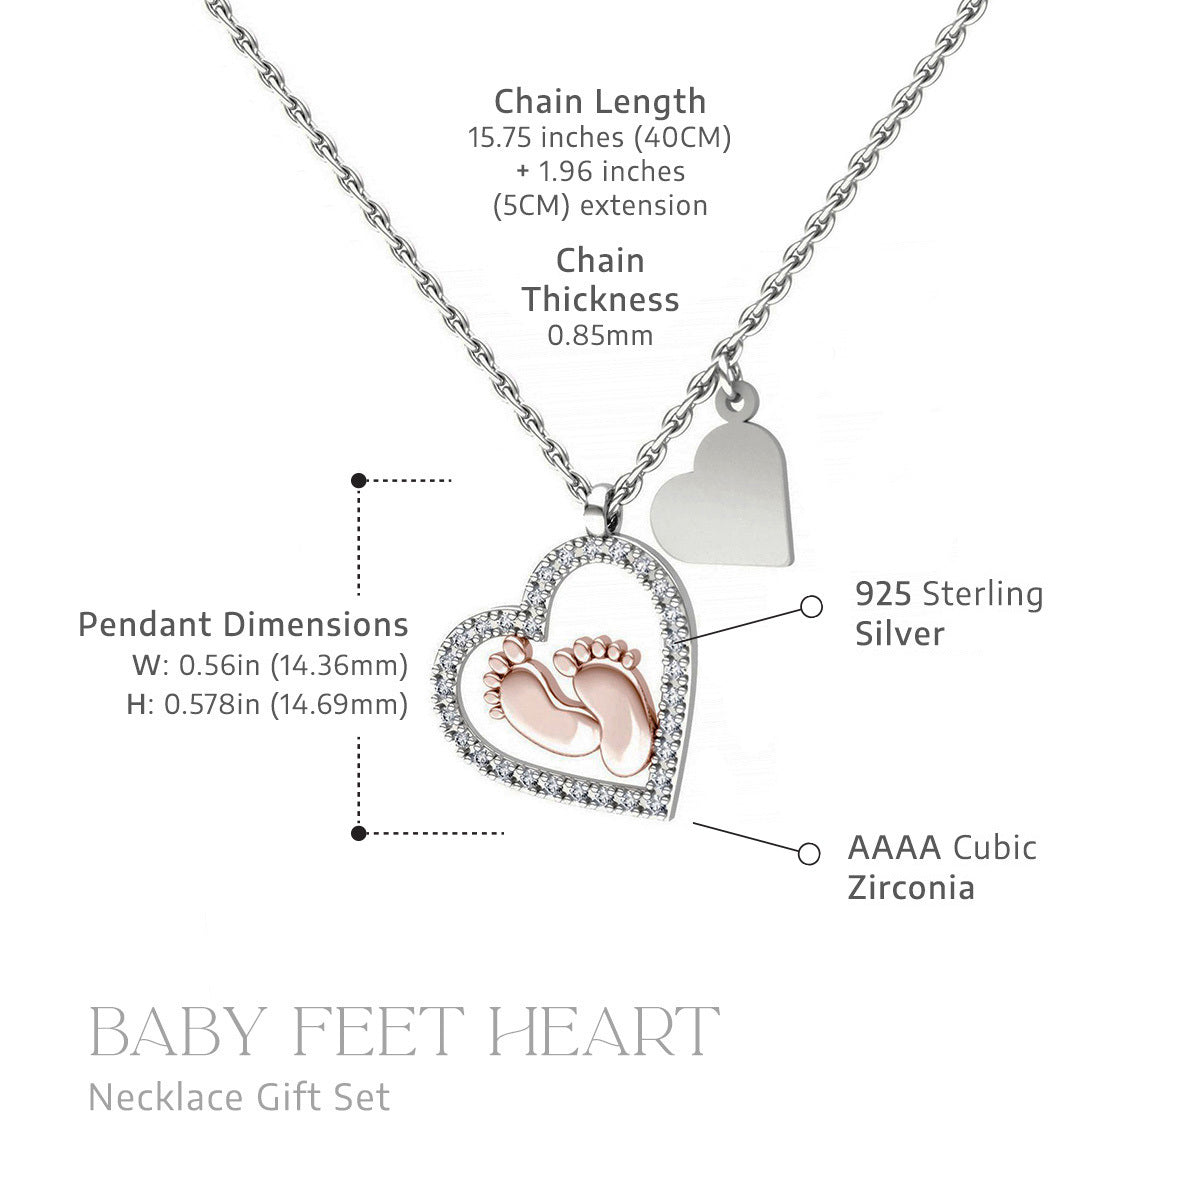 To My Mommy, First Mother’s Day (Baby Grinch) - Baby Feet Heart Necklace Gift Set